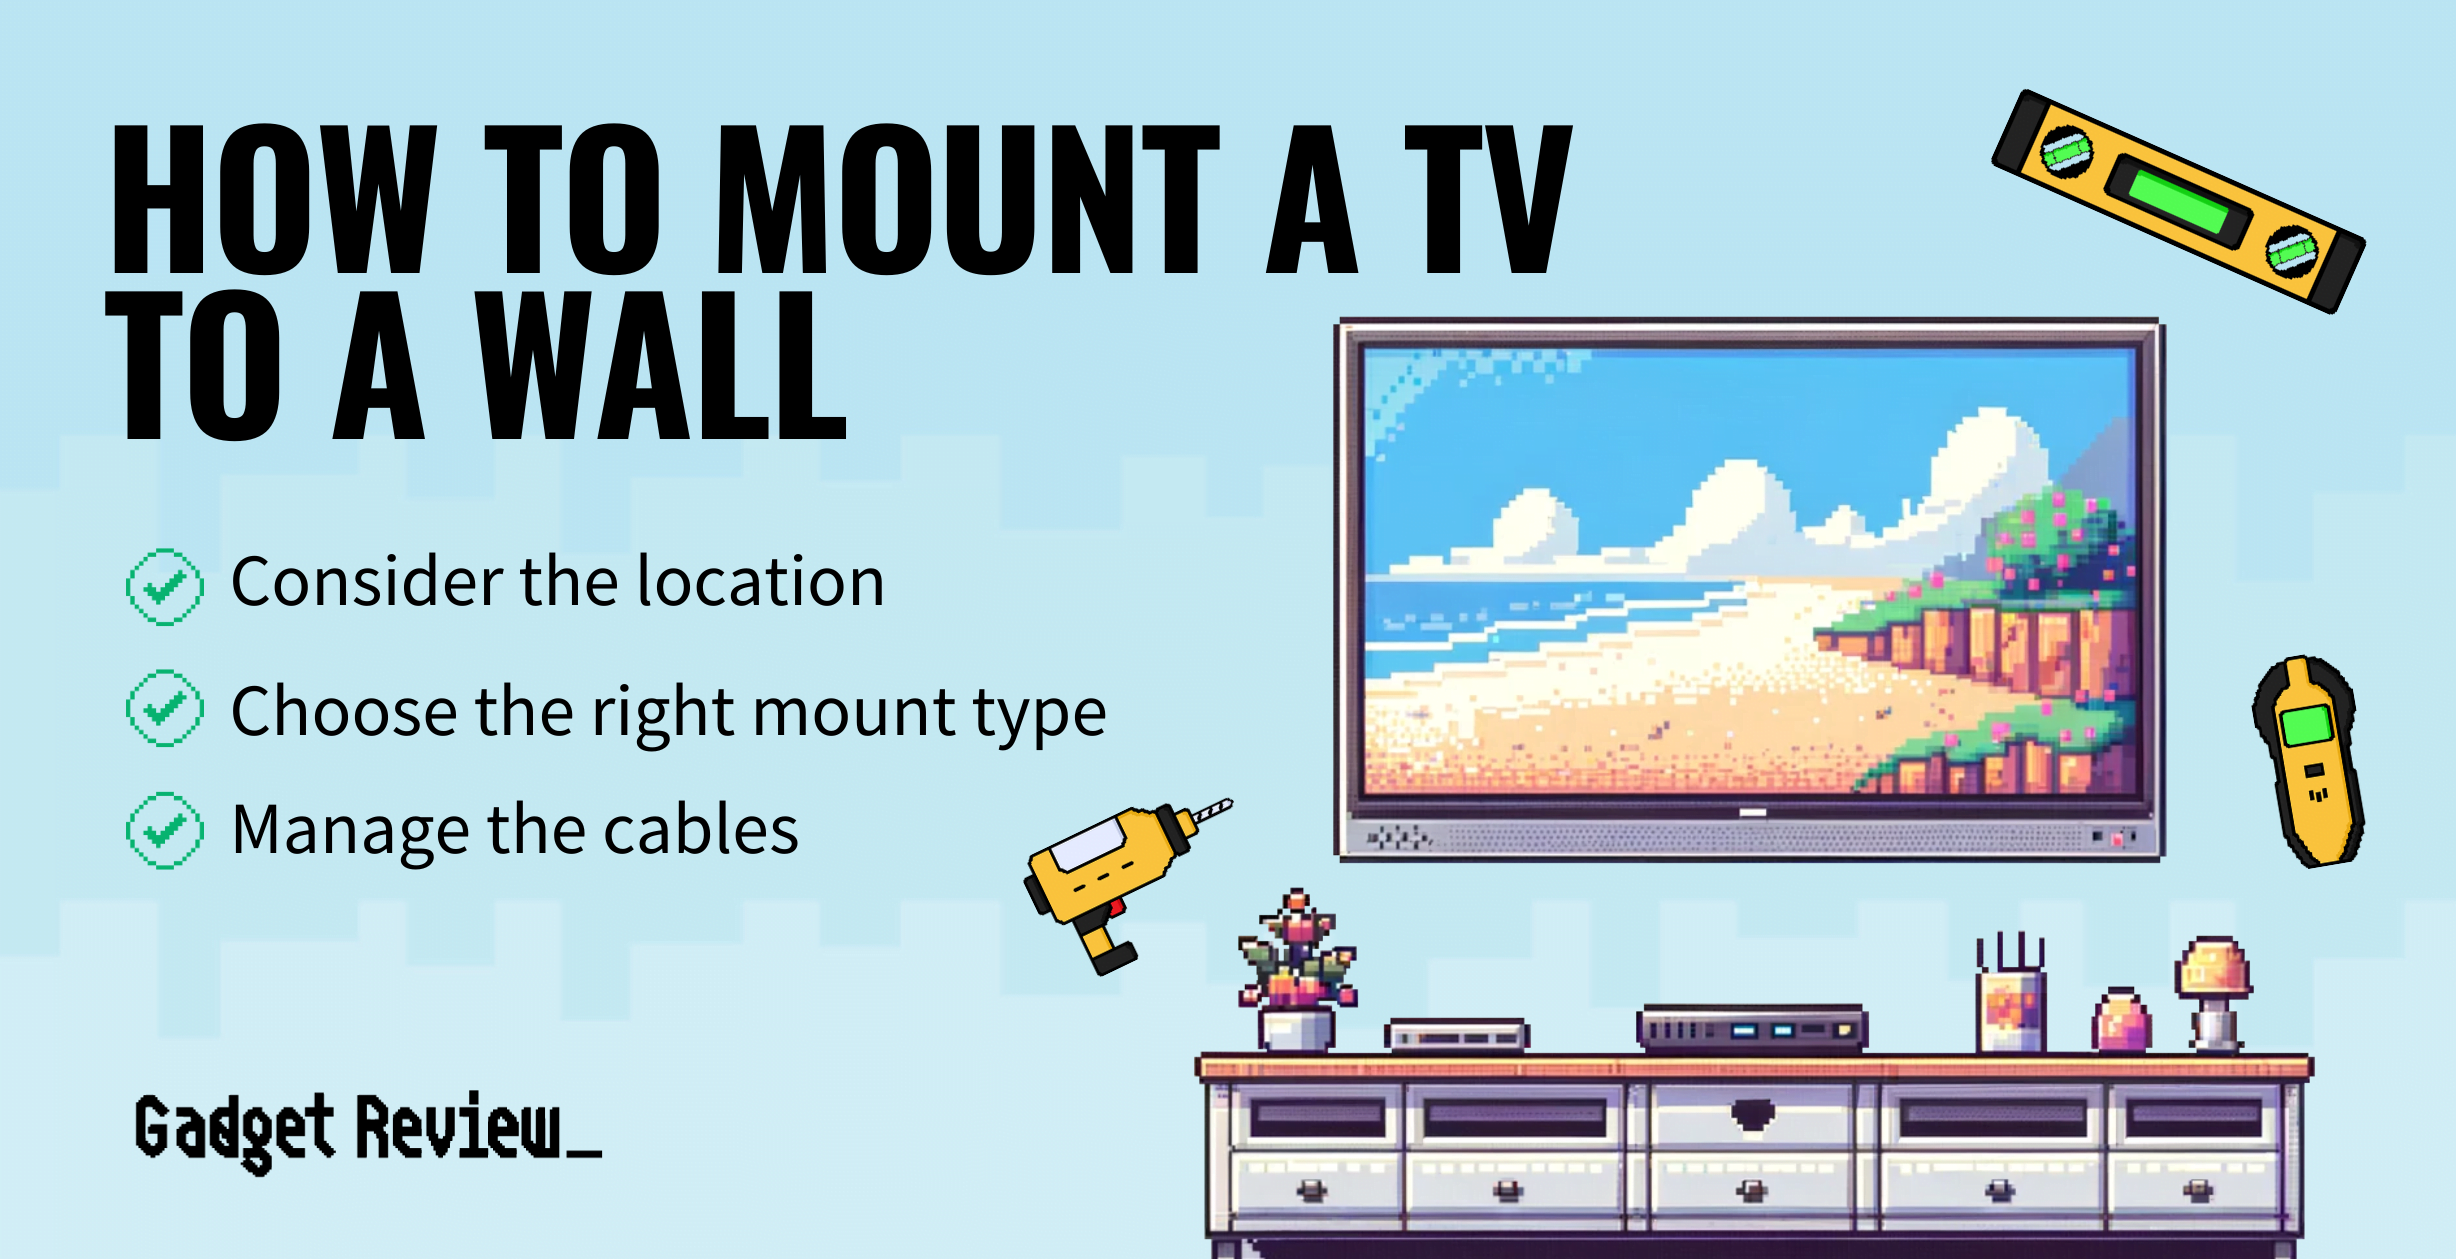 How To Mount A TV On The Wall